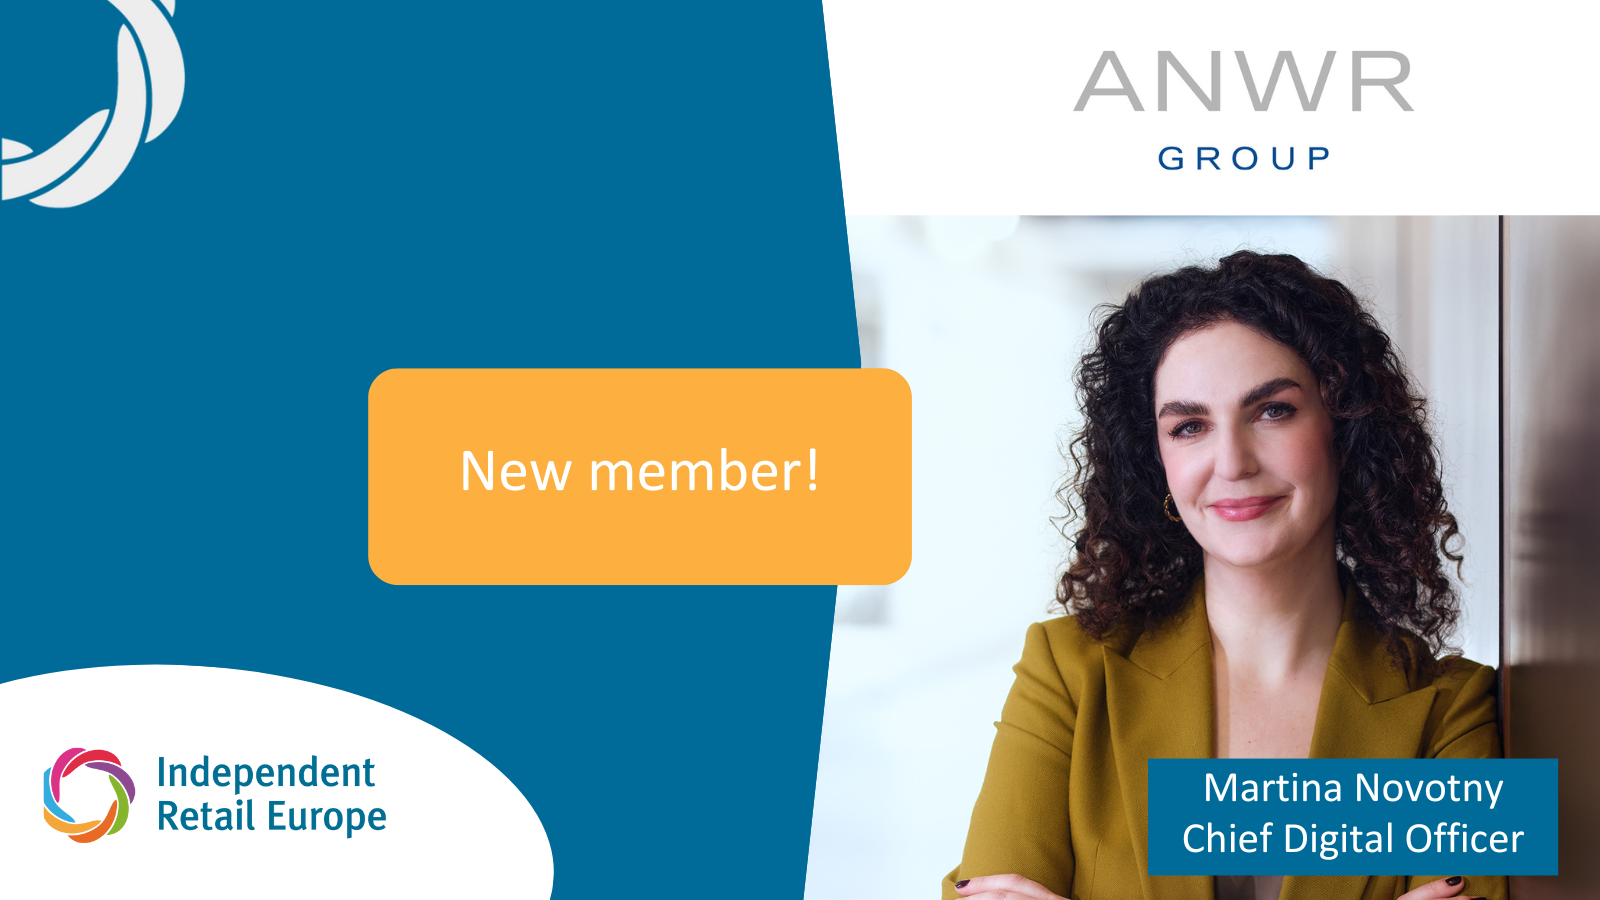 We are excited to welcome a new member, ANWR GROUP, to Independent Retail Europe!